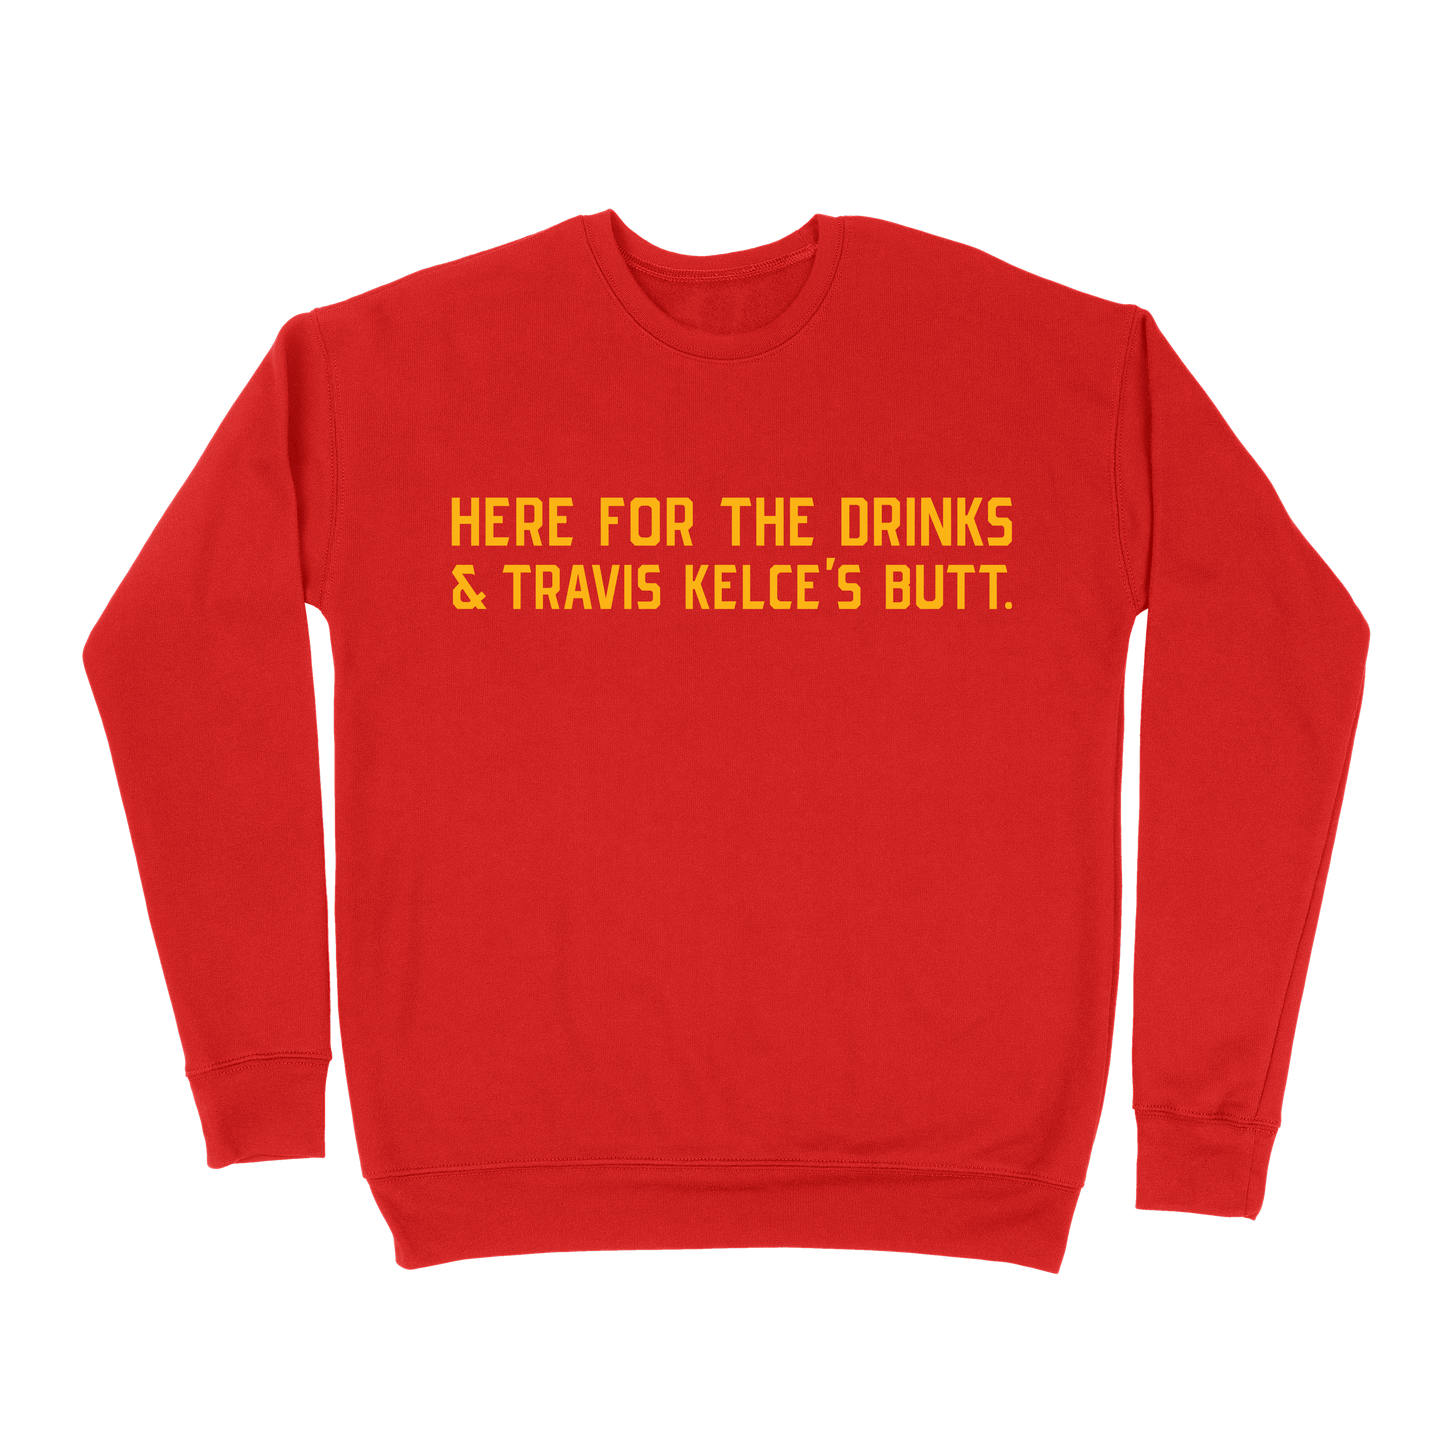 Here For The Drinks and Travis Kelce's Butt Sweatshirt - Red